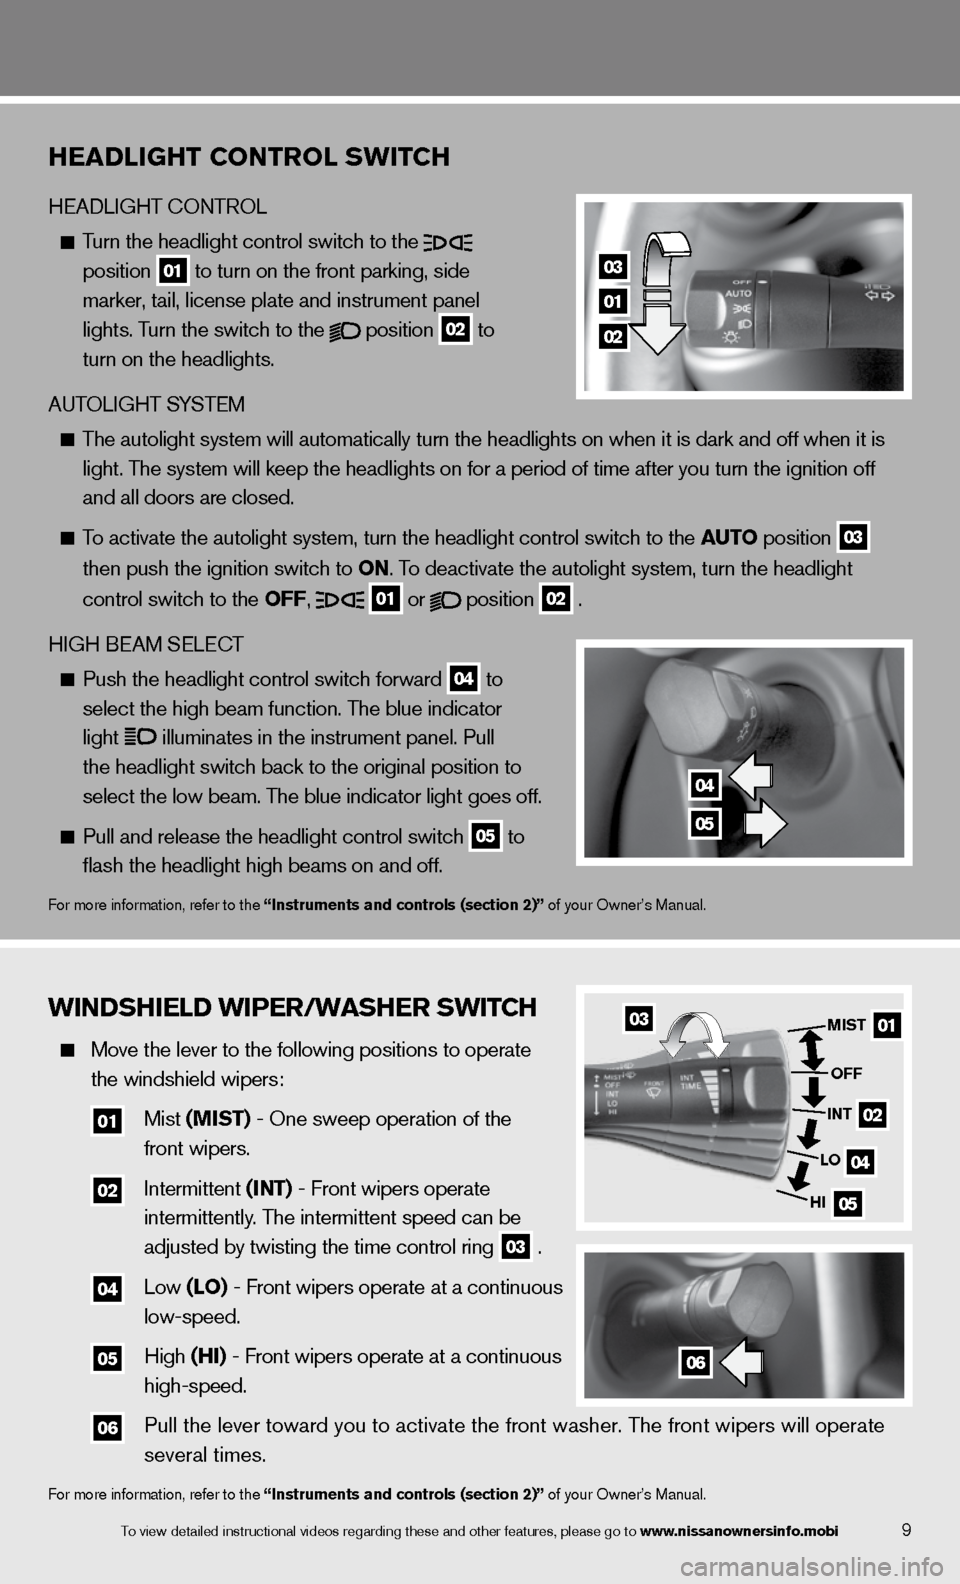 NISSAN 370Z ROADSTER 2013 Z34 Quick Reference Guide WINDSHIE\bD WIPER/W\fSH\FER SWITCH
  Move \fhe lever \fo \fh\me following posi\fio\mns \fo opera\fe 
    \fhe windshield wipe\mrs:   
  
01  Mis\f (MIST) - One sweep opera\m\fion of \fhe   
        fr